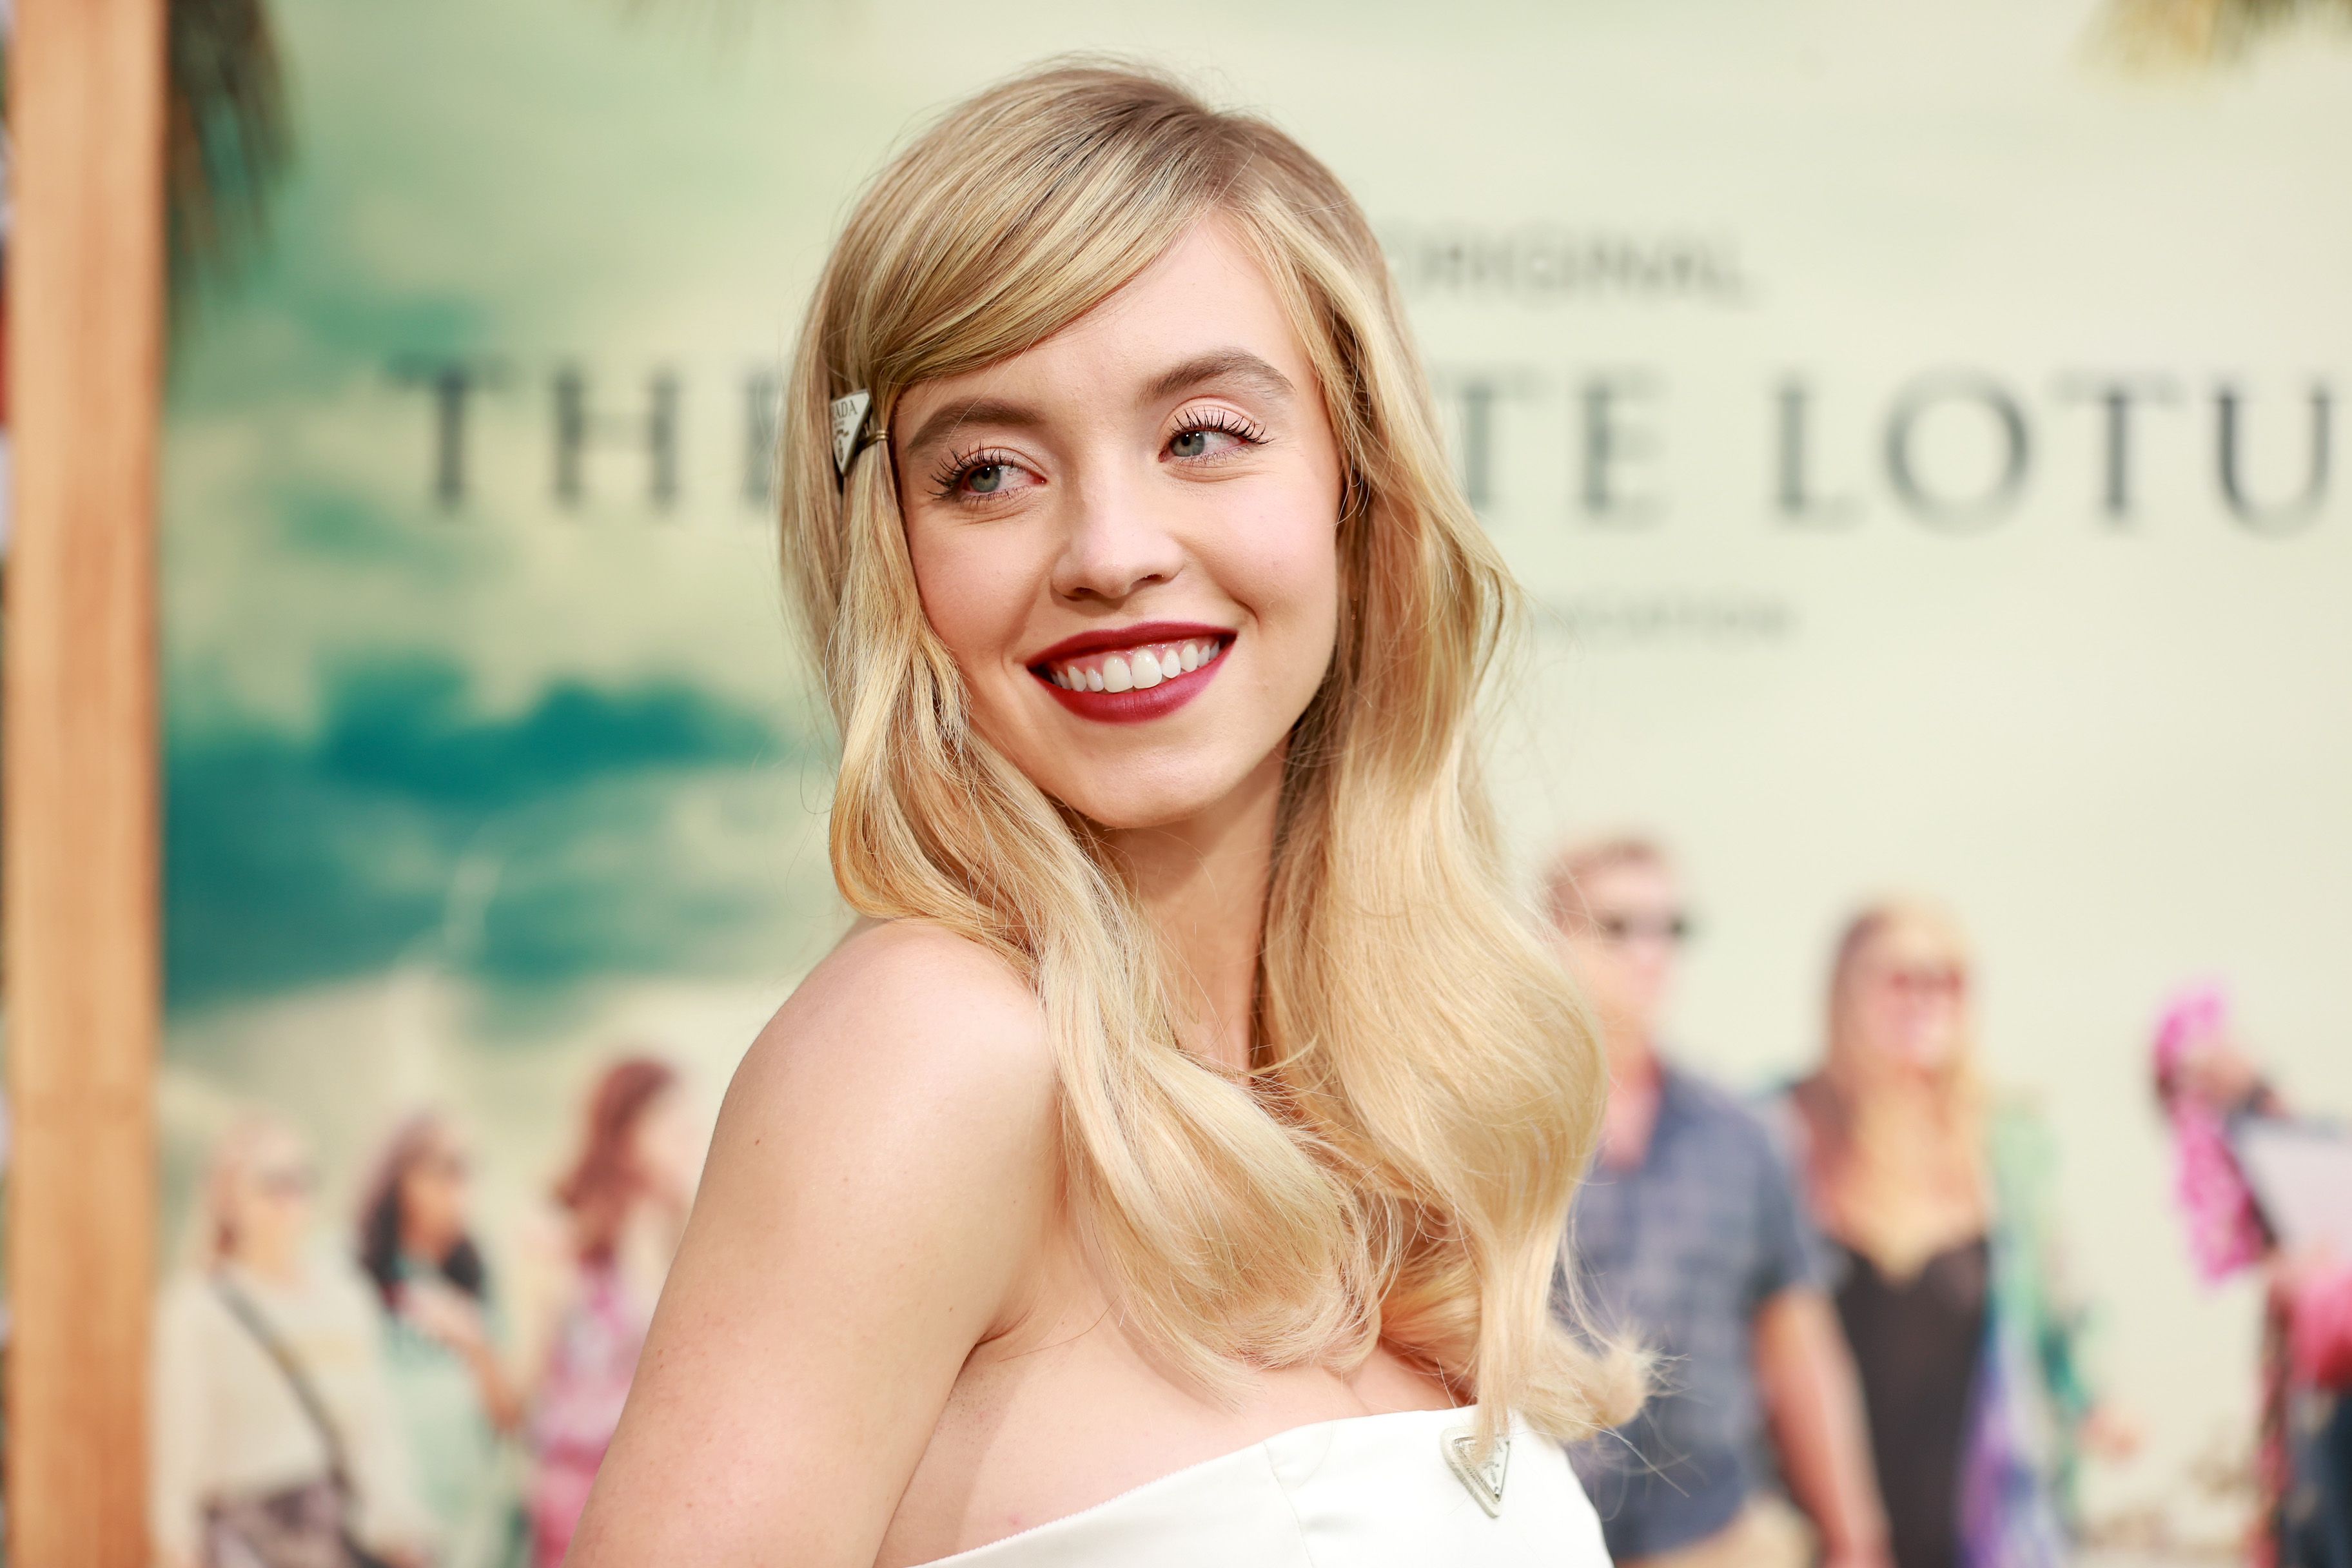 Euphoria cast member Sydney Sweeney arrives to 'The White Lotus' premiere in Los Angeles in a white dress